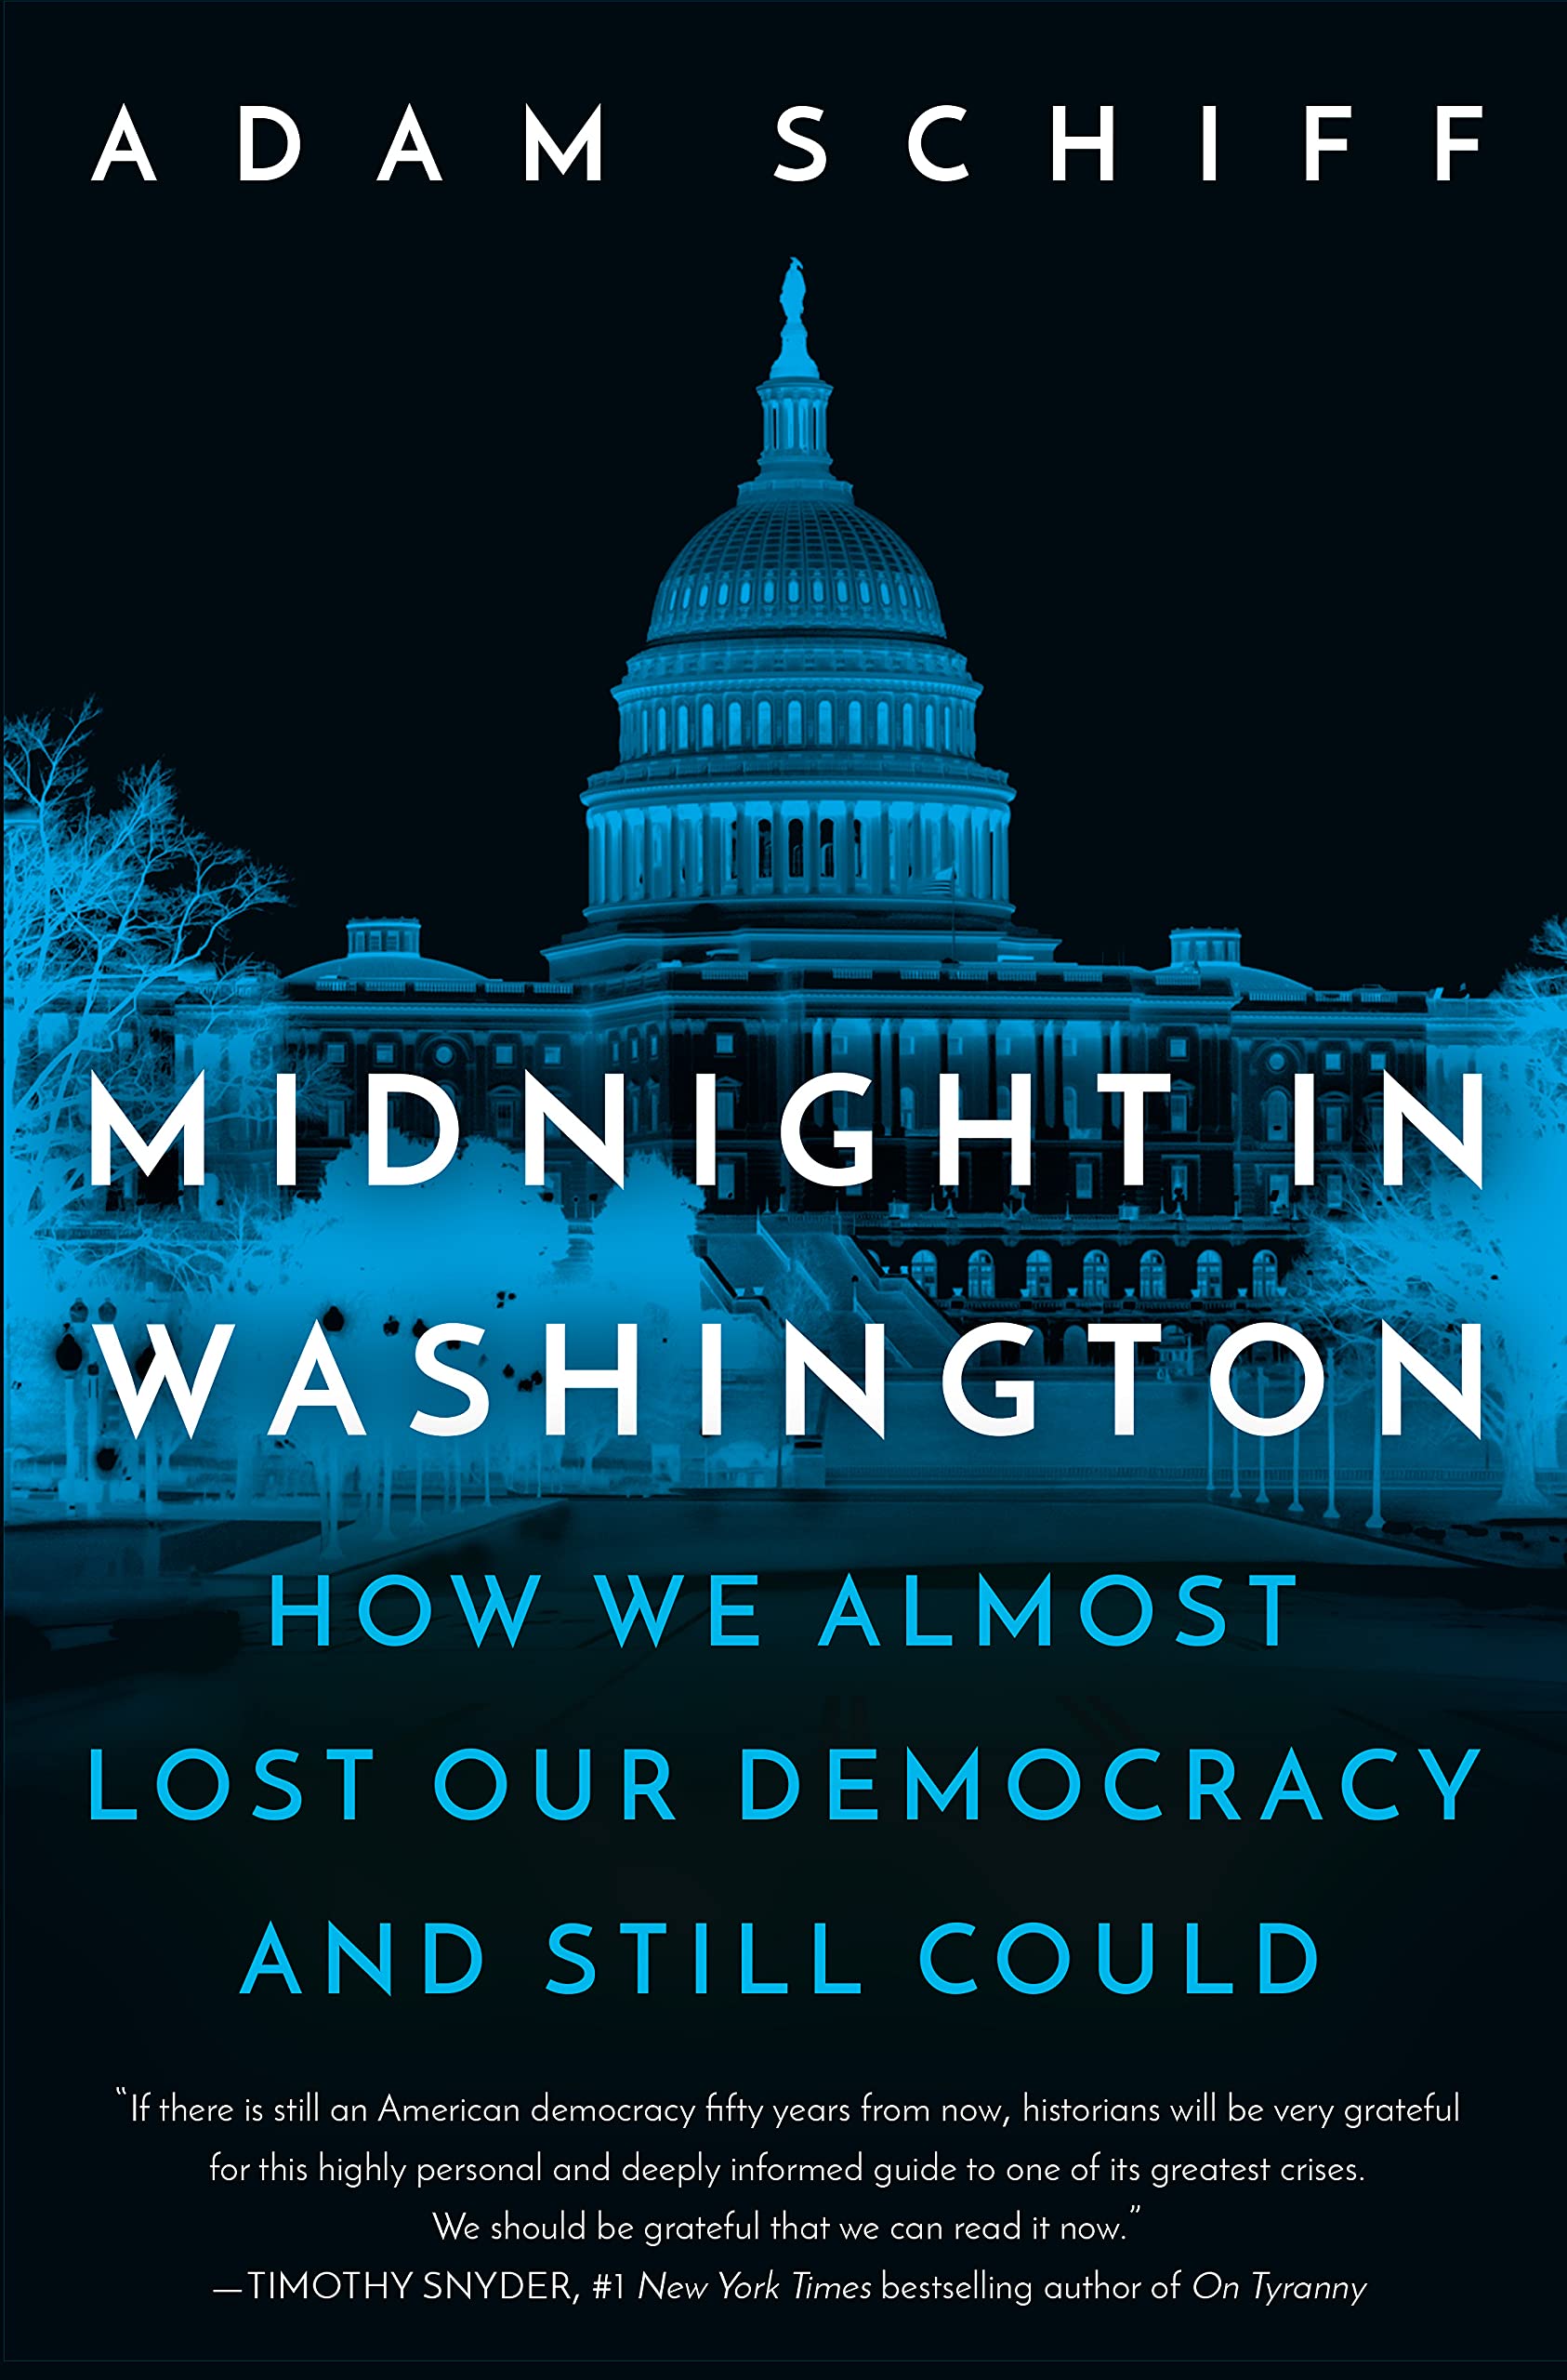 “Midnight In Washington – How We Almost Lost Our Democracy And Still Could”